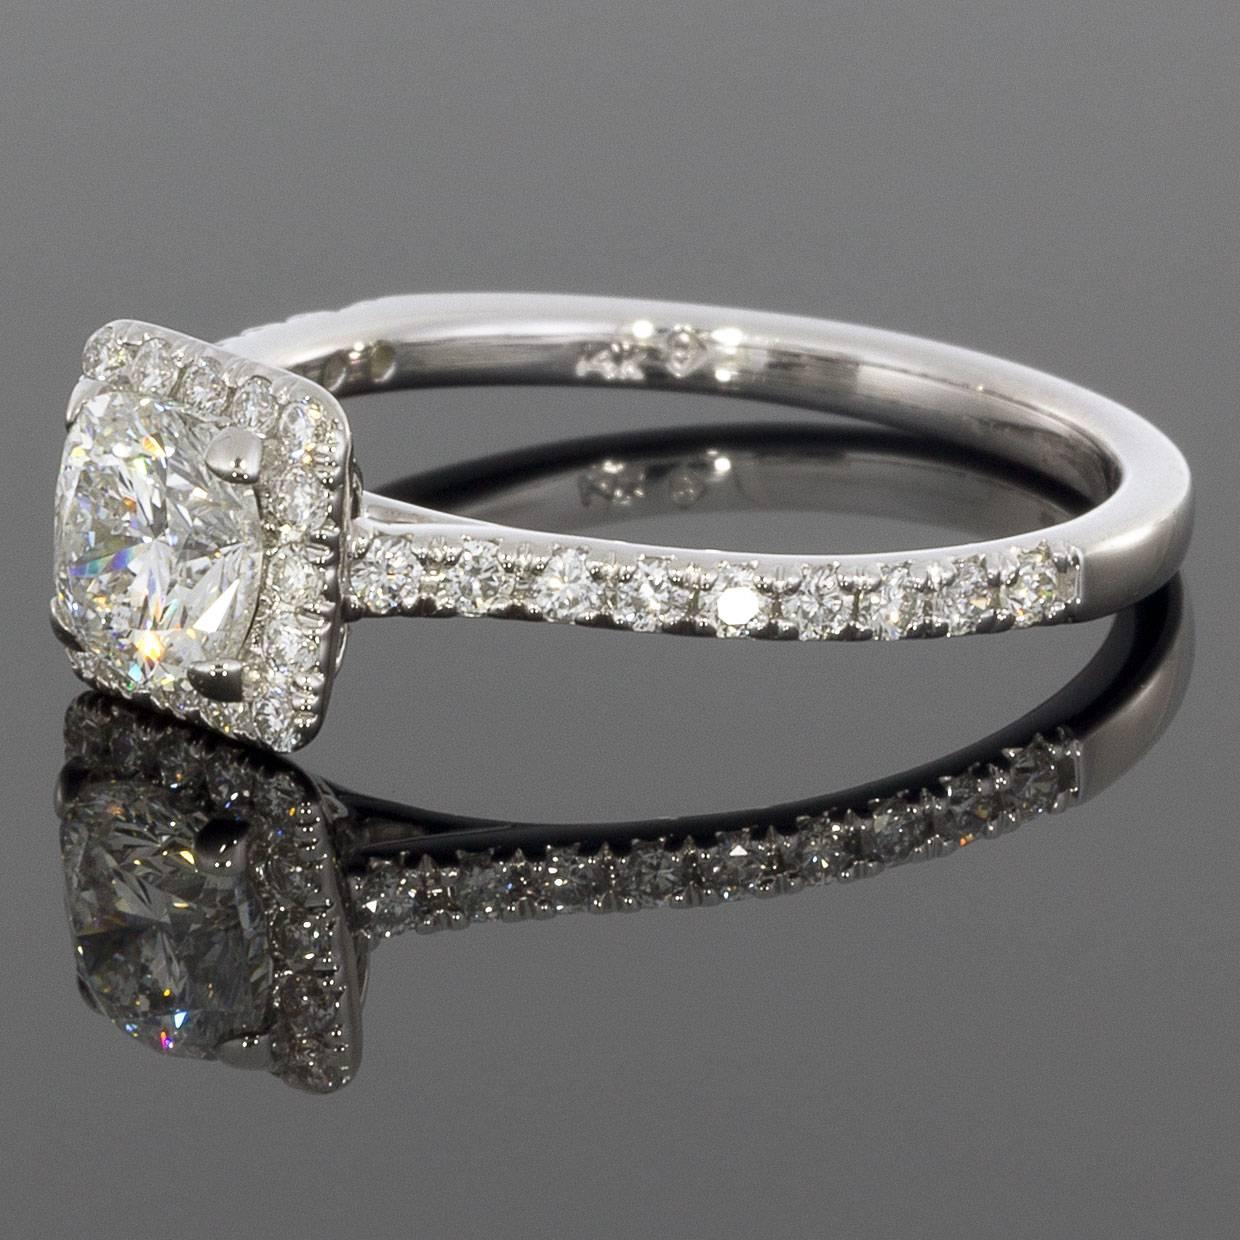 Details:
.75CT Center Cushion Diamond
F/I1 Quality
.33CTW Princess Halo setting
14K White Gold
MSRP $5200
Comes in a beautiful presentation box
An adult signature will be required for delivery unless other arrangements are made prior to purchasing